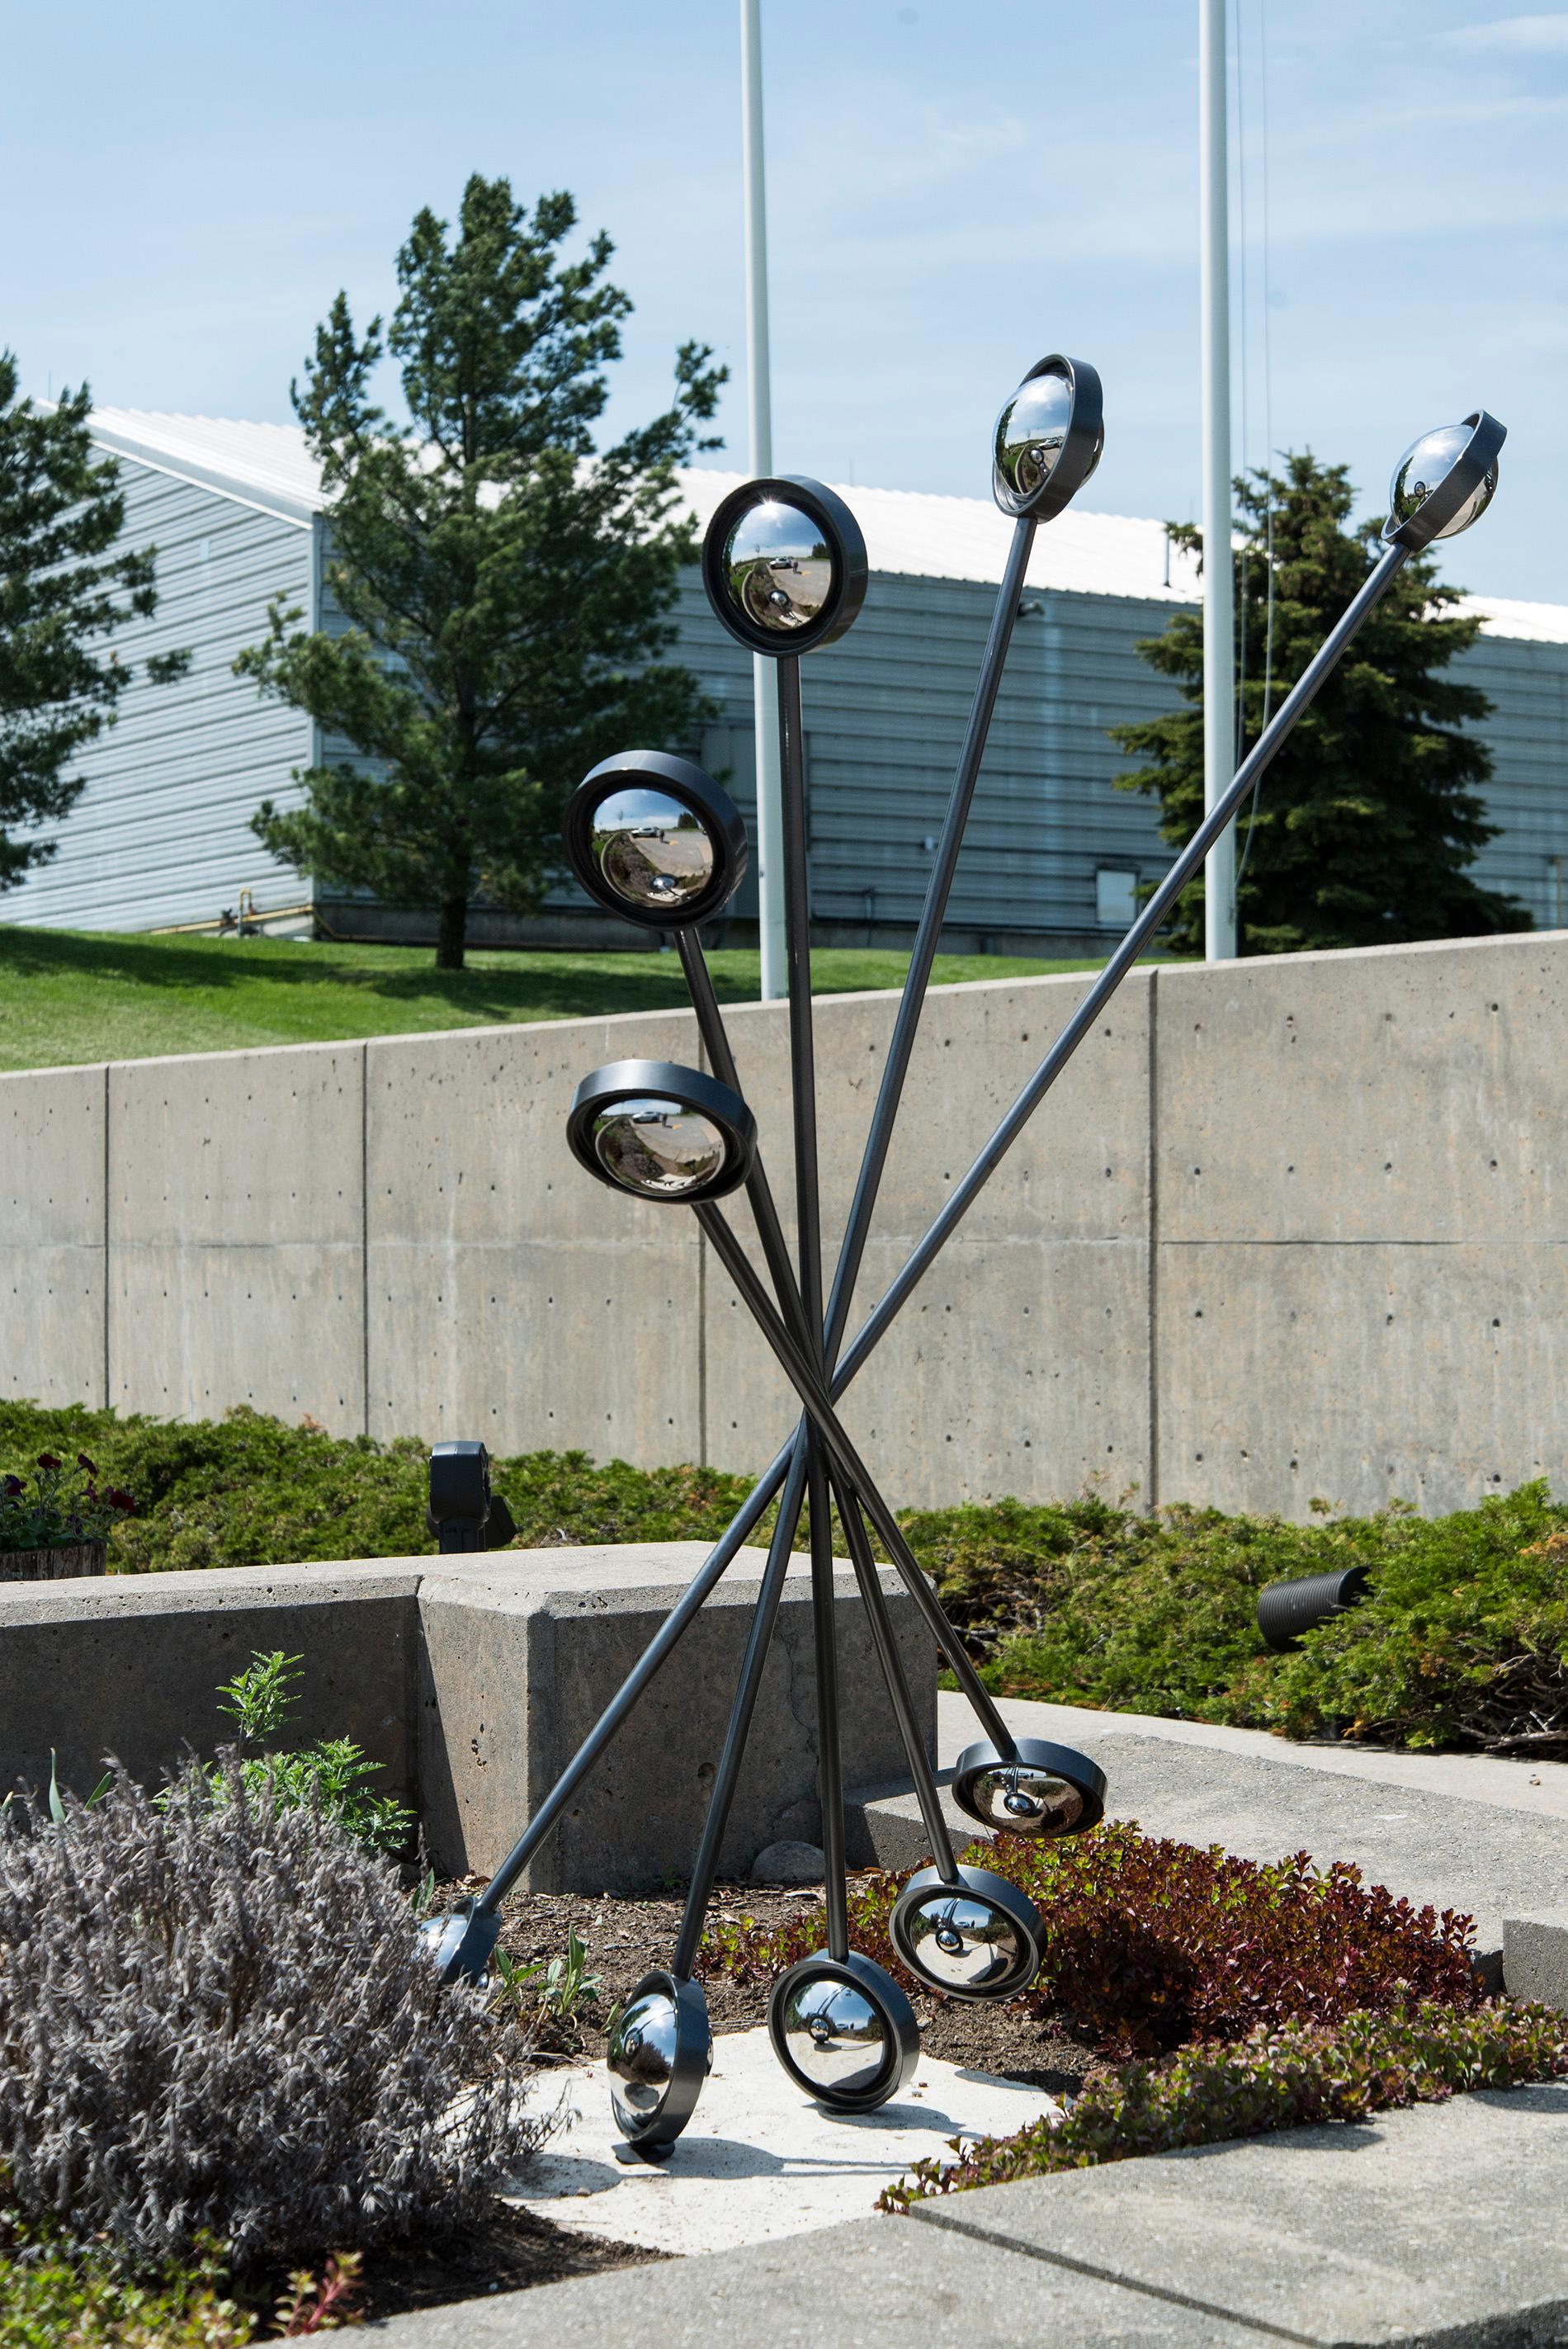 Action - tall, dynamic, reflective, geometric, abstract, steel outdoor sculpture - Gray Abstract Sculpture by Ryan Van Der Hout